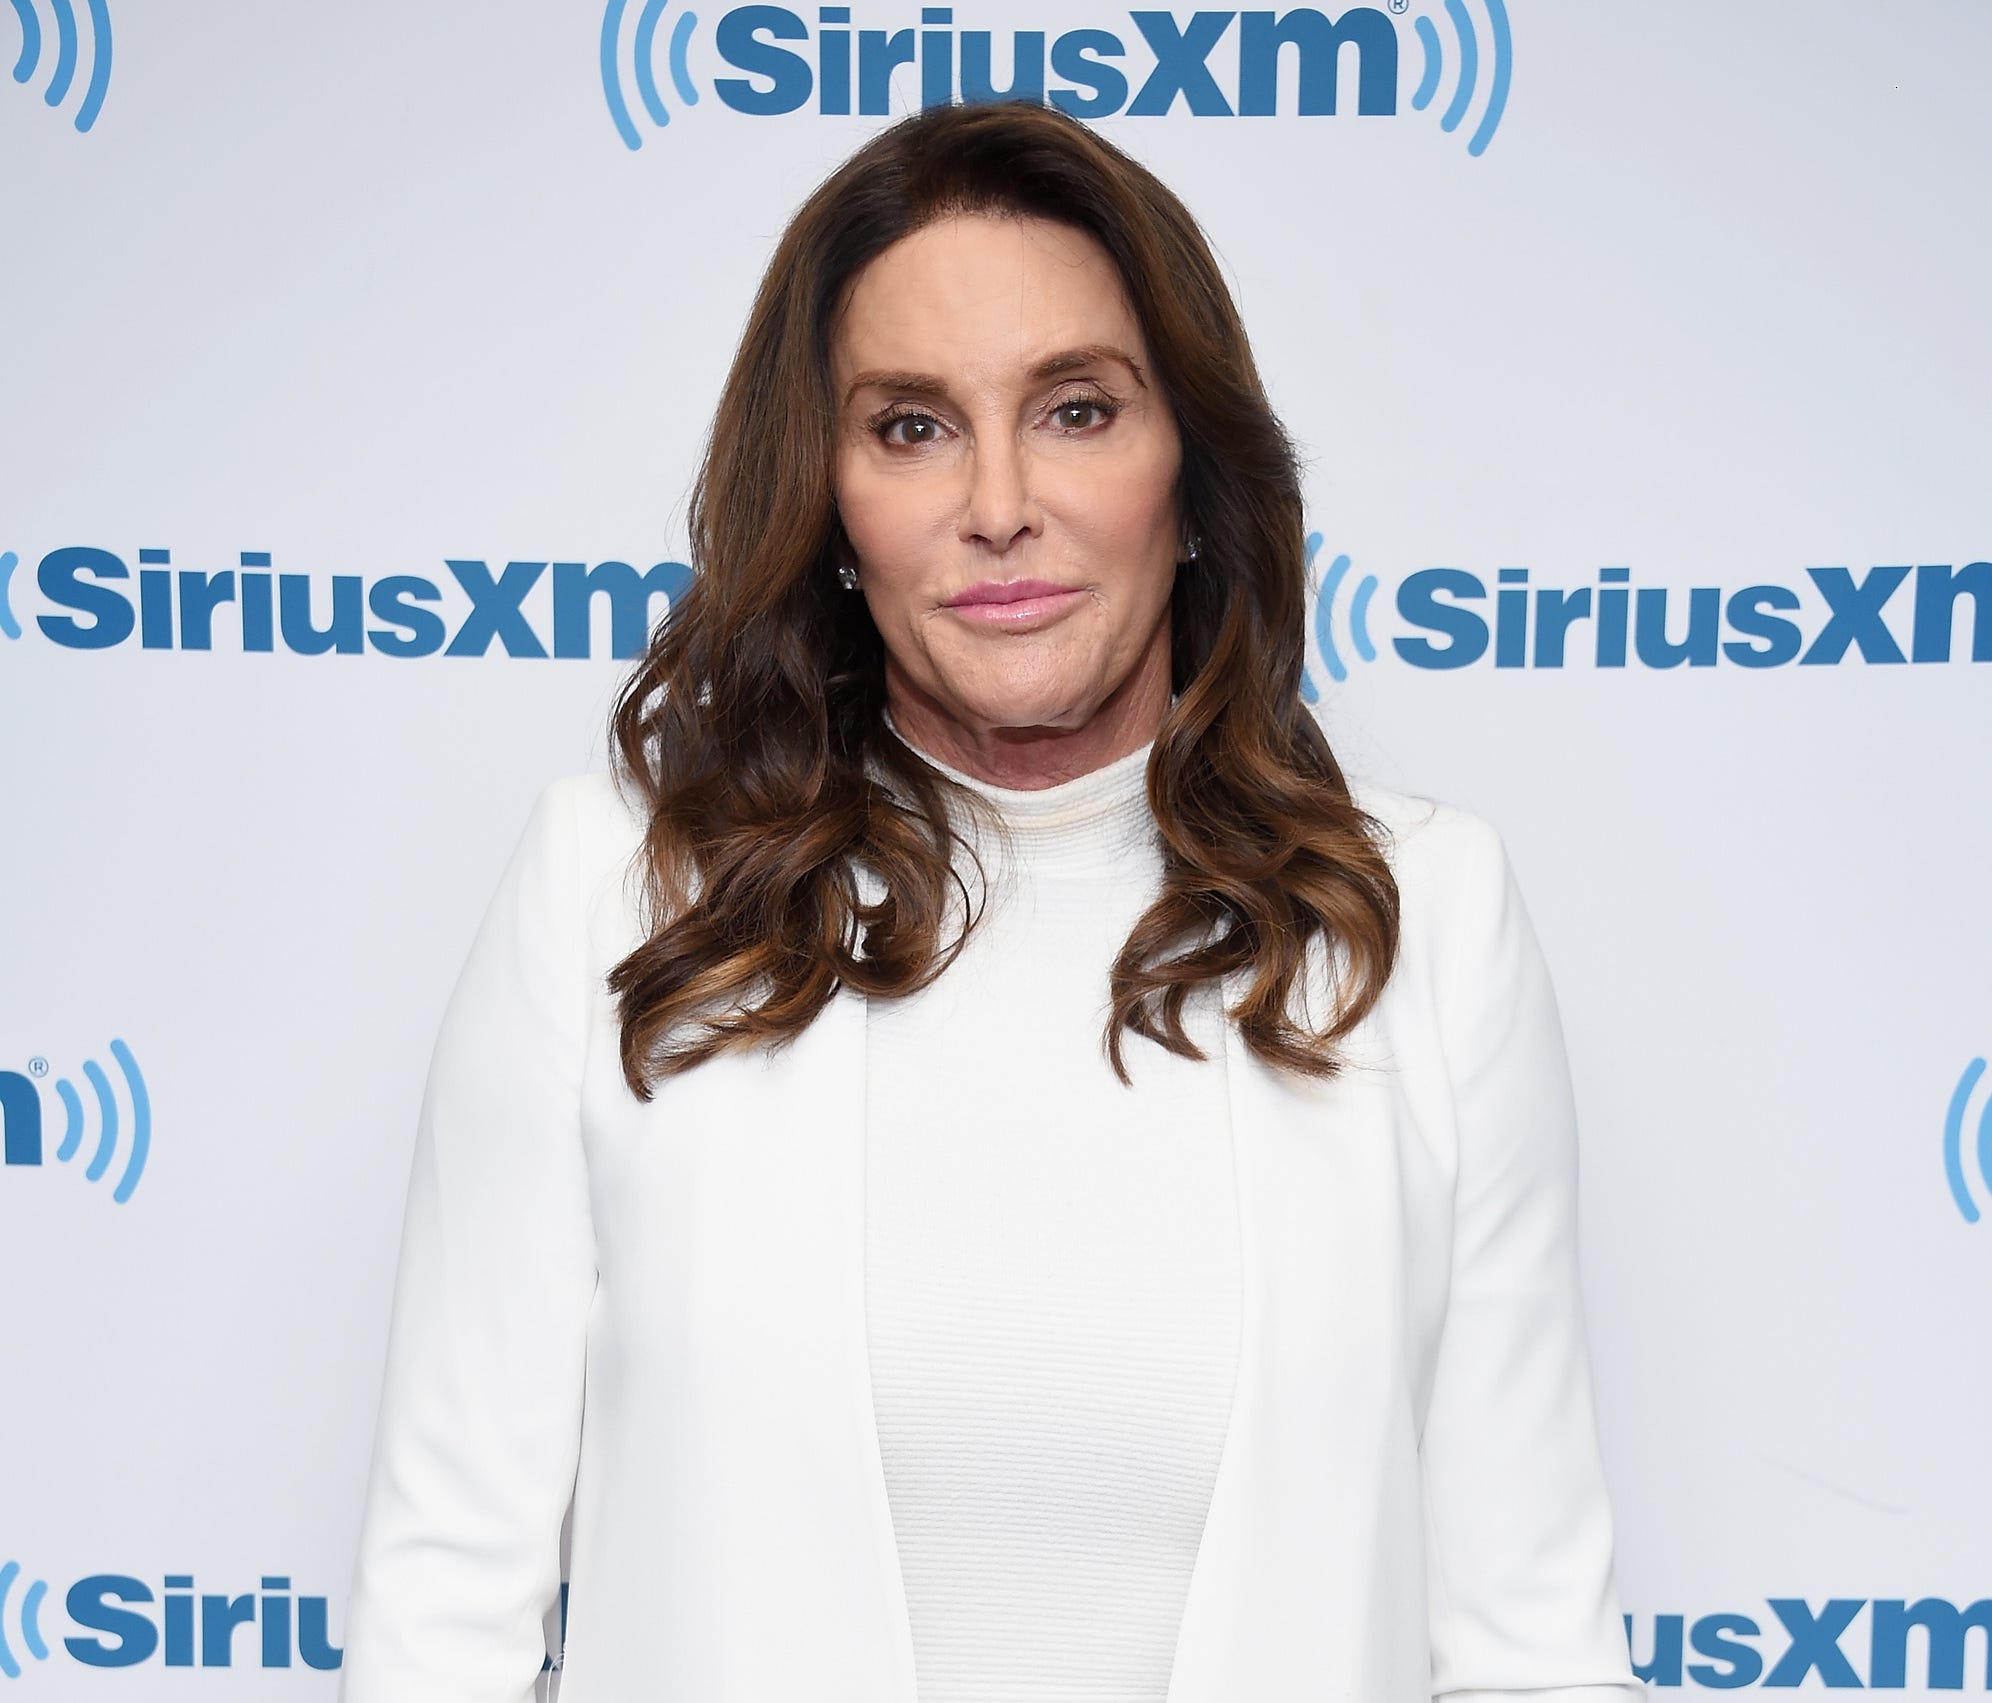 Caitlyn Jenner 'knew' O.J. Simpson did it, she said in a new interview on Wednesday.